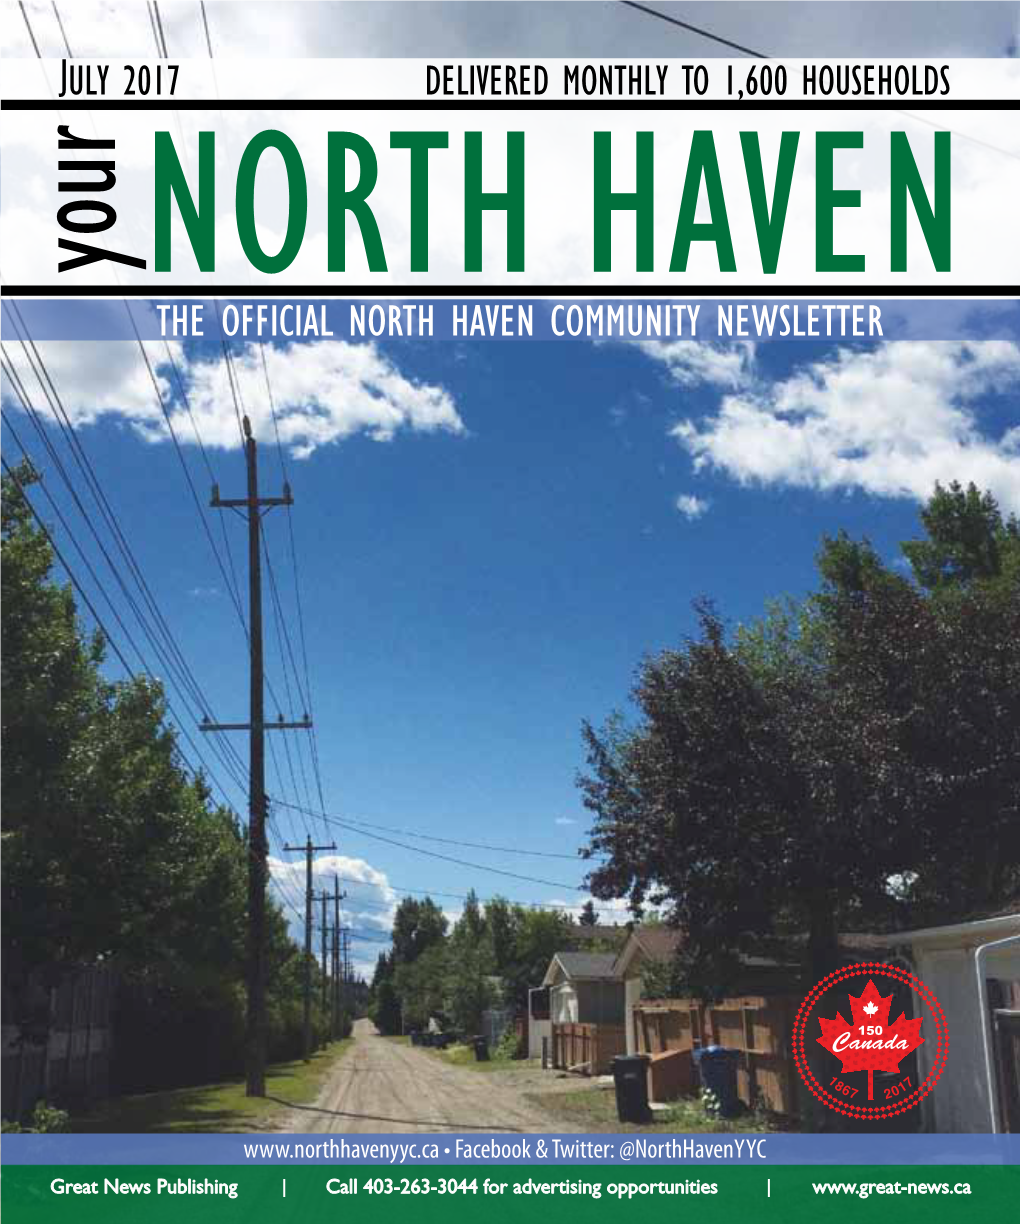 The Official North Haven Community Newsletter